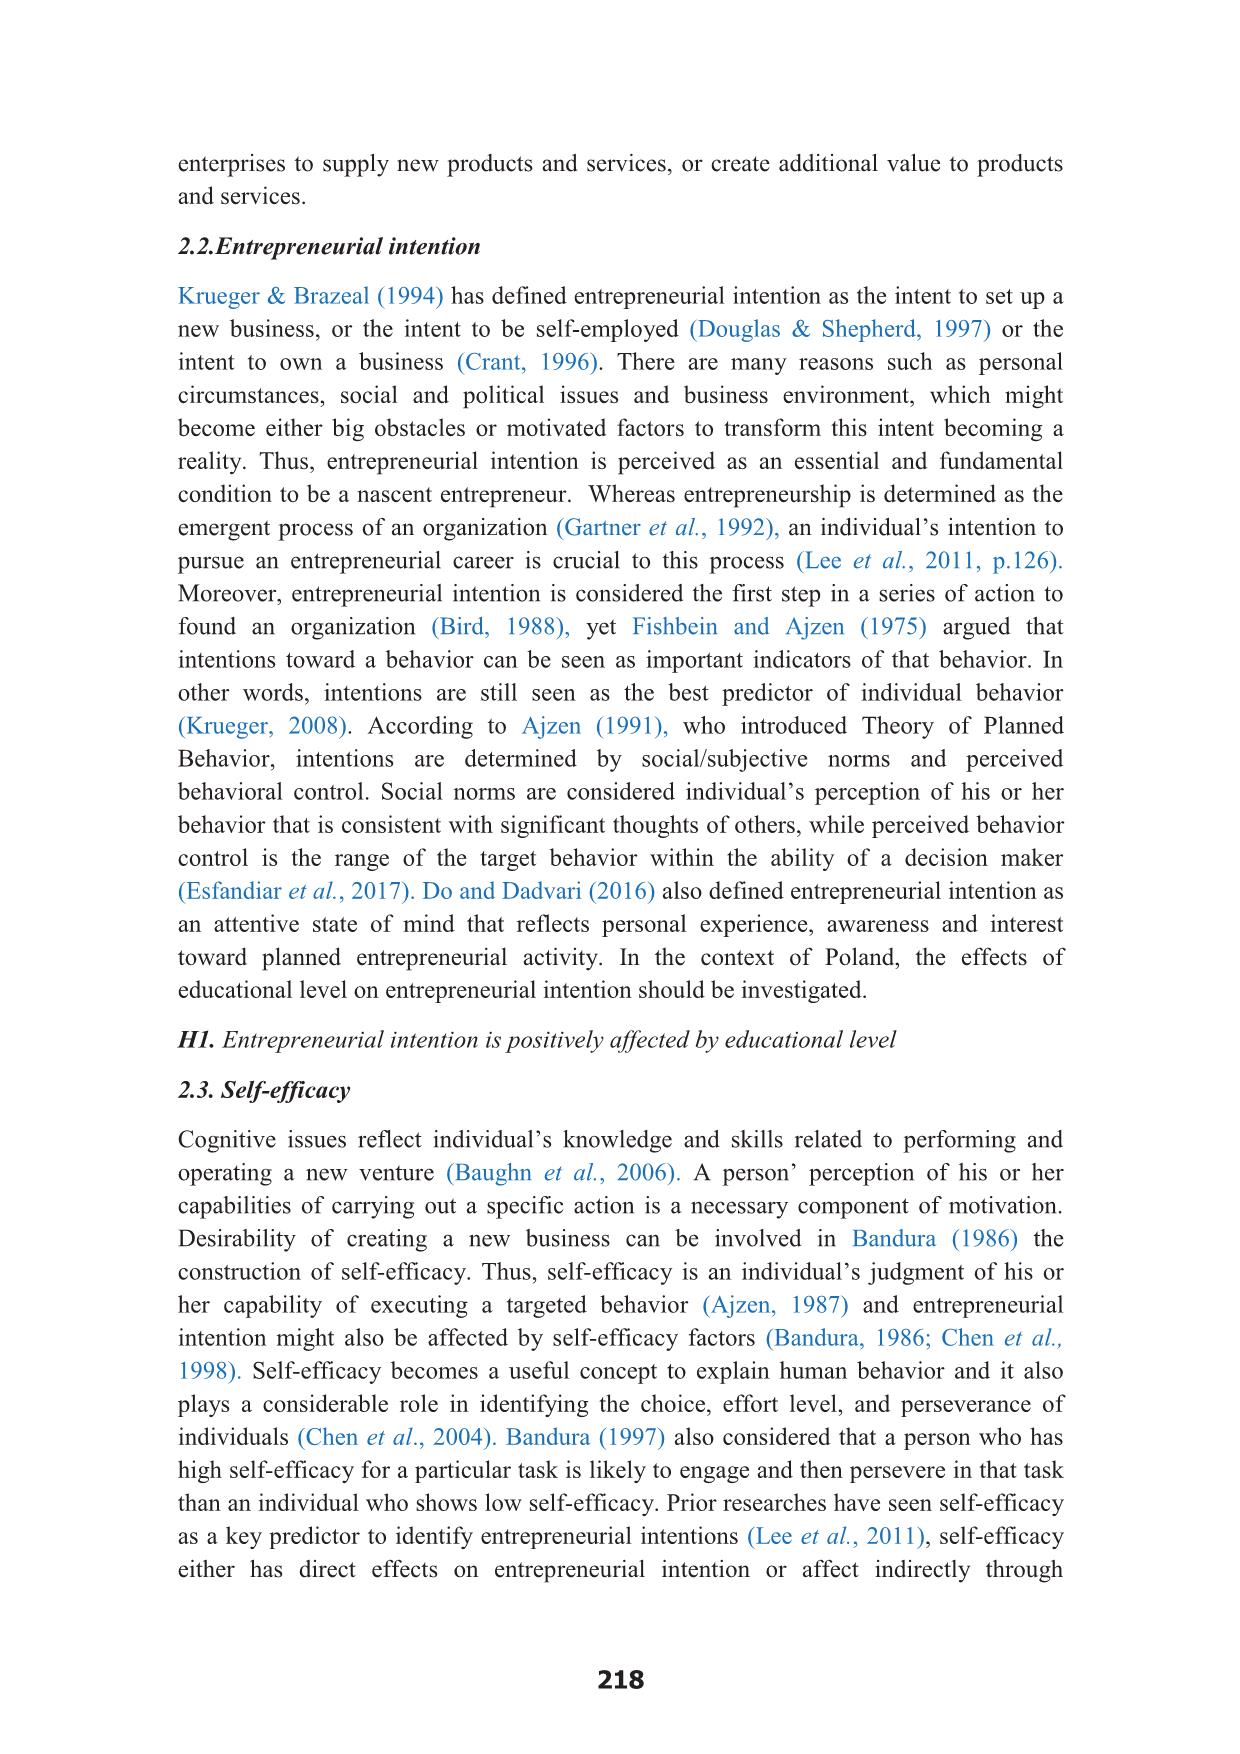 Self-efficacy, perceived behavioral control and entrepreneurial intention among polish students in the context of industry 4.0: Assessing the effect of education level trang 4